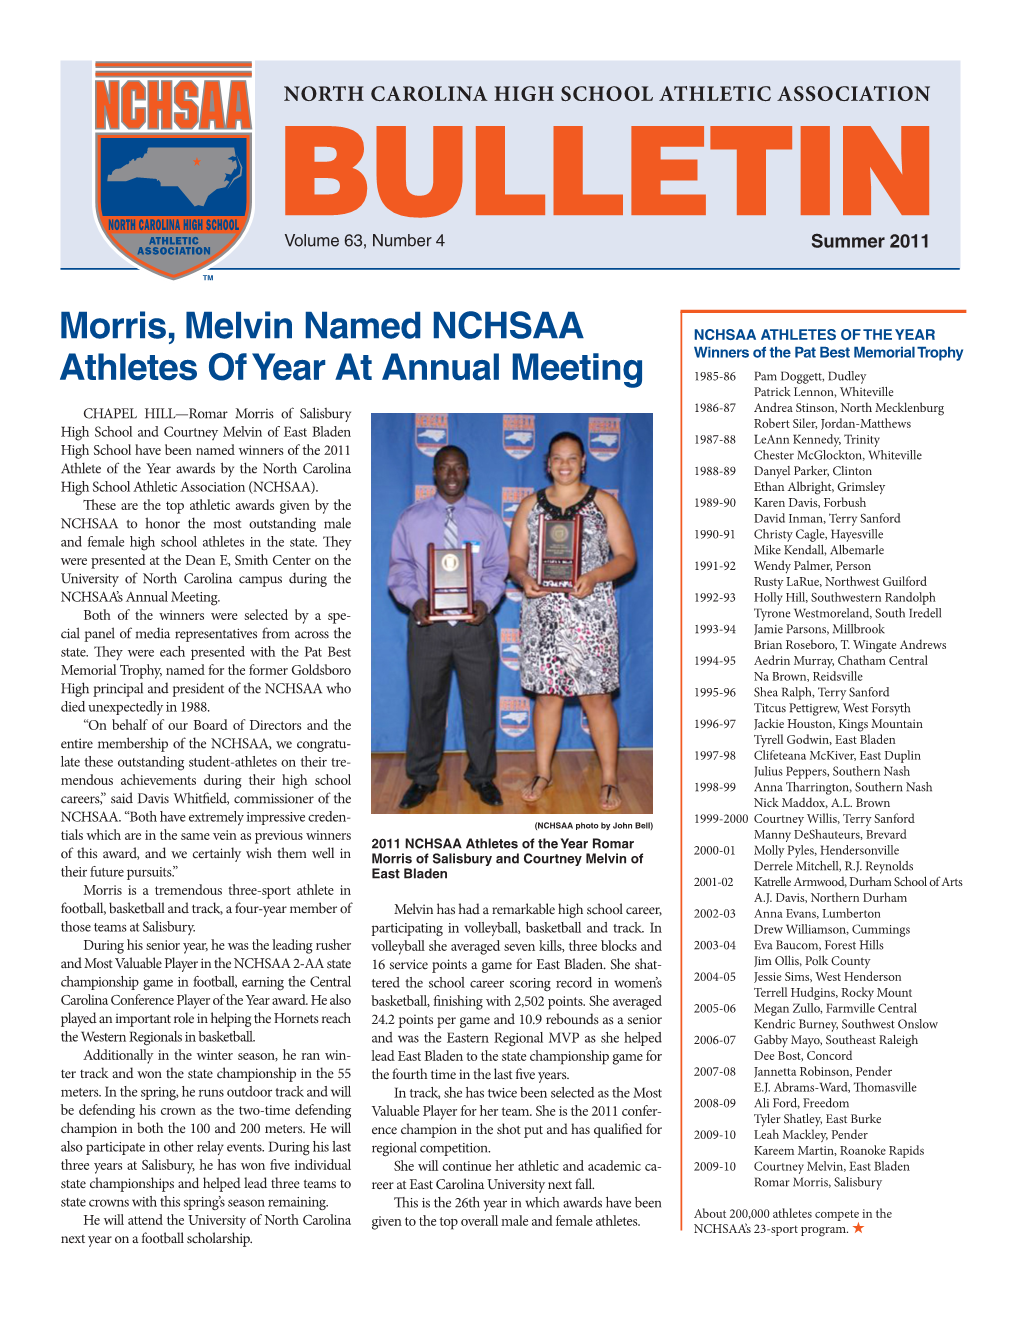 Morris, Melvin Named NCHSAA Athletes of Year at Annual Meeting